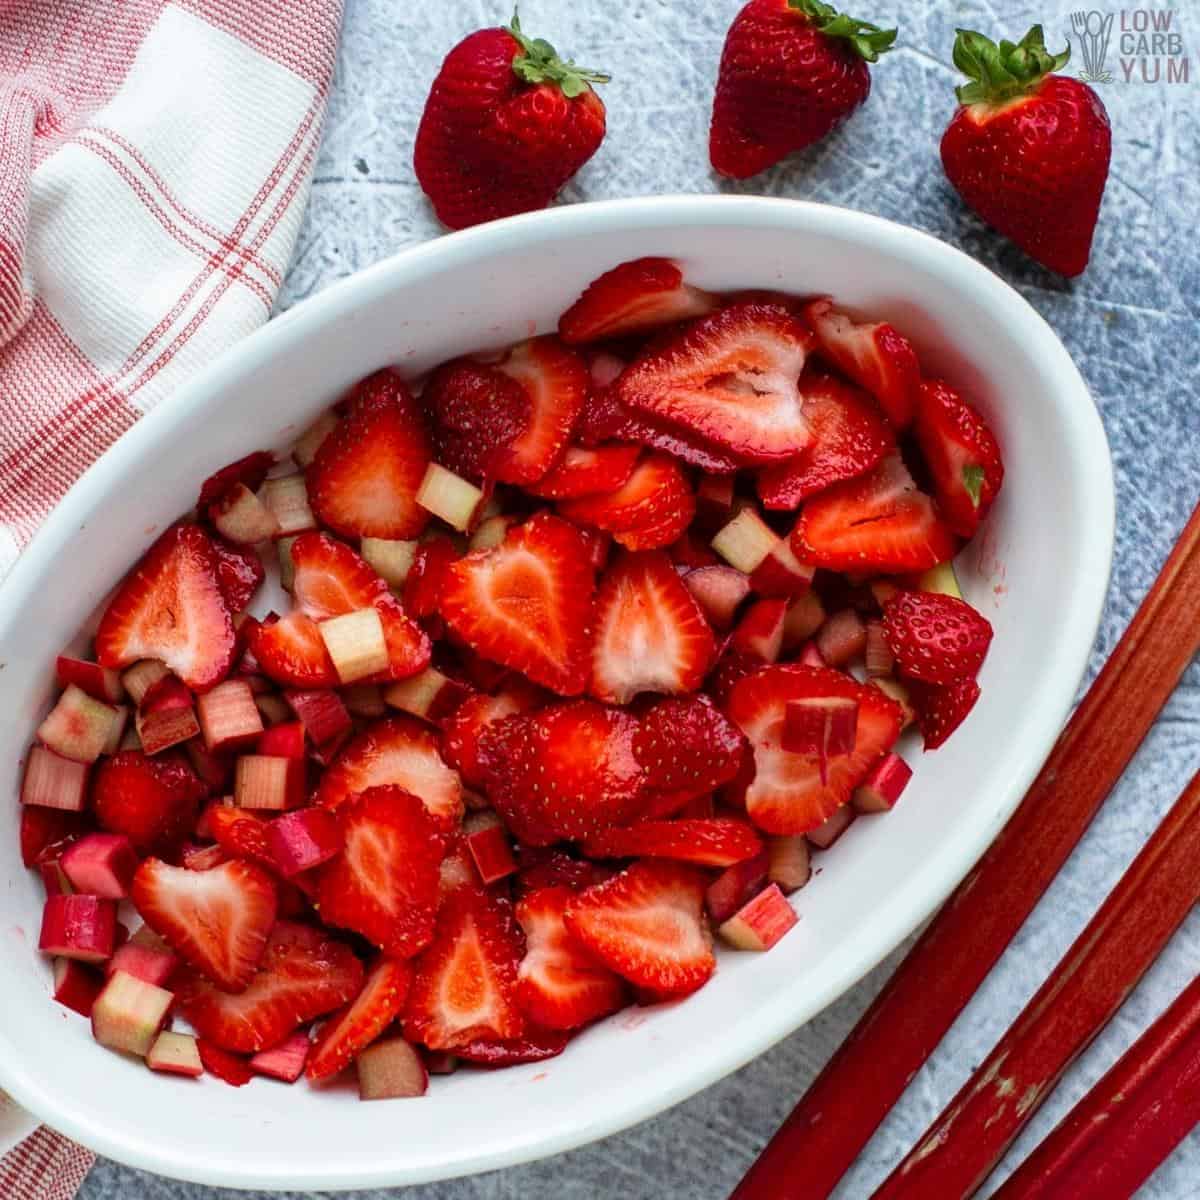 rhubarb and strawberry in oval dish.